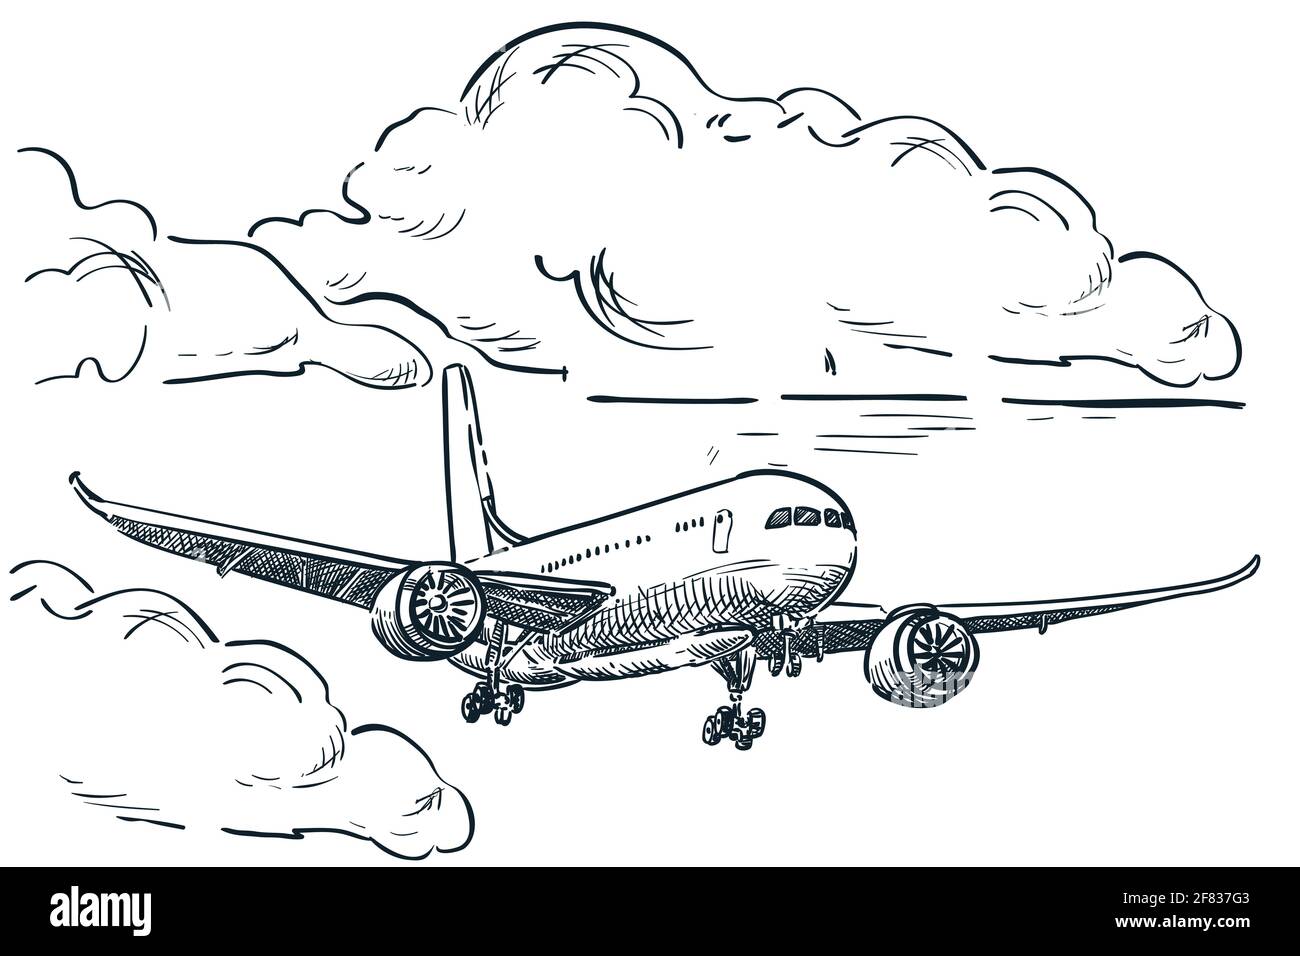 Plane flies in sky clouds, vector sketch illustration. Air travel, tourism flight, plane tickets booking hand drawn isolated design elements Stock Vector